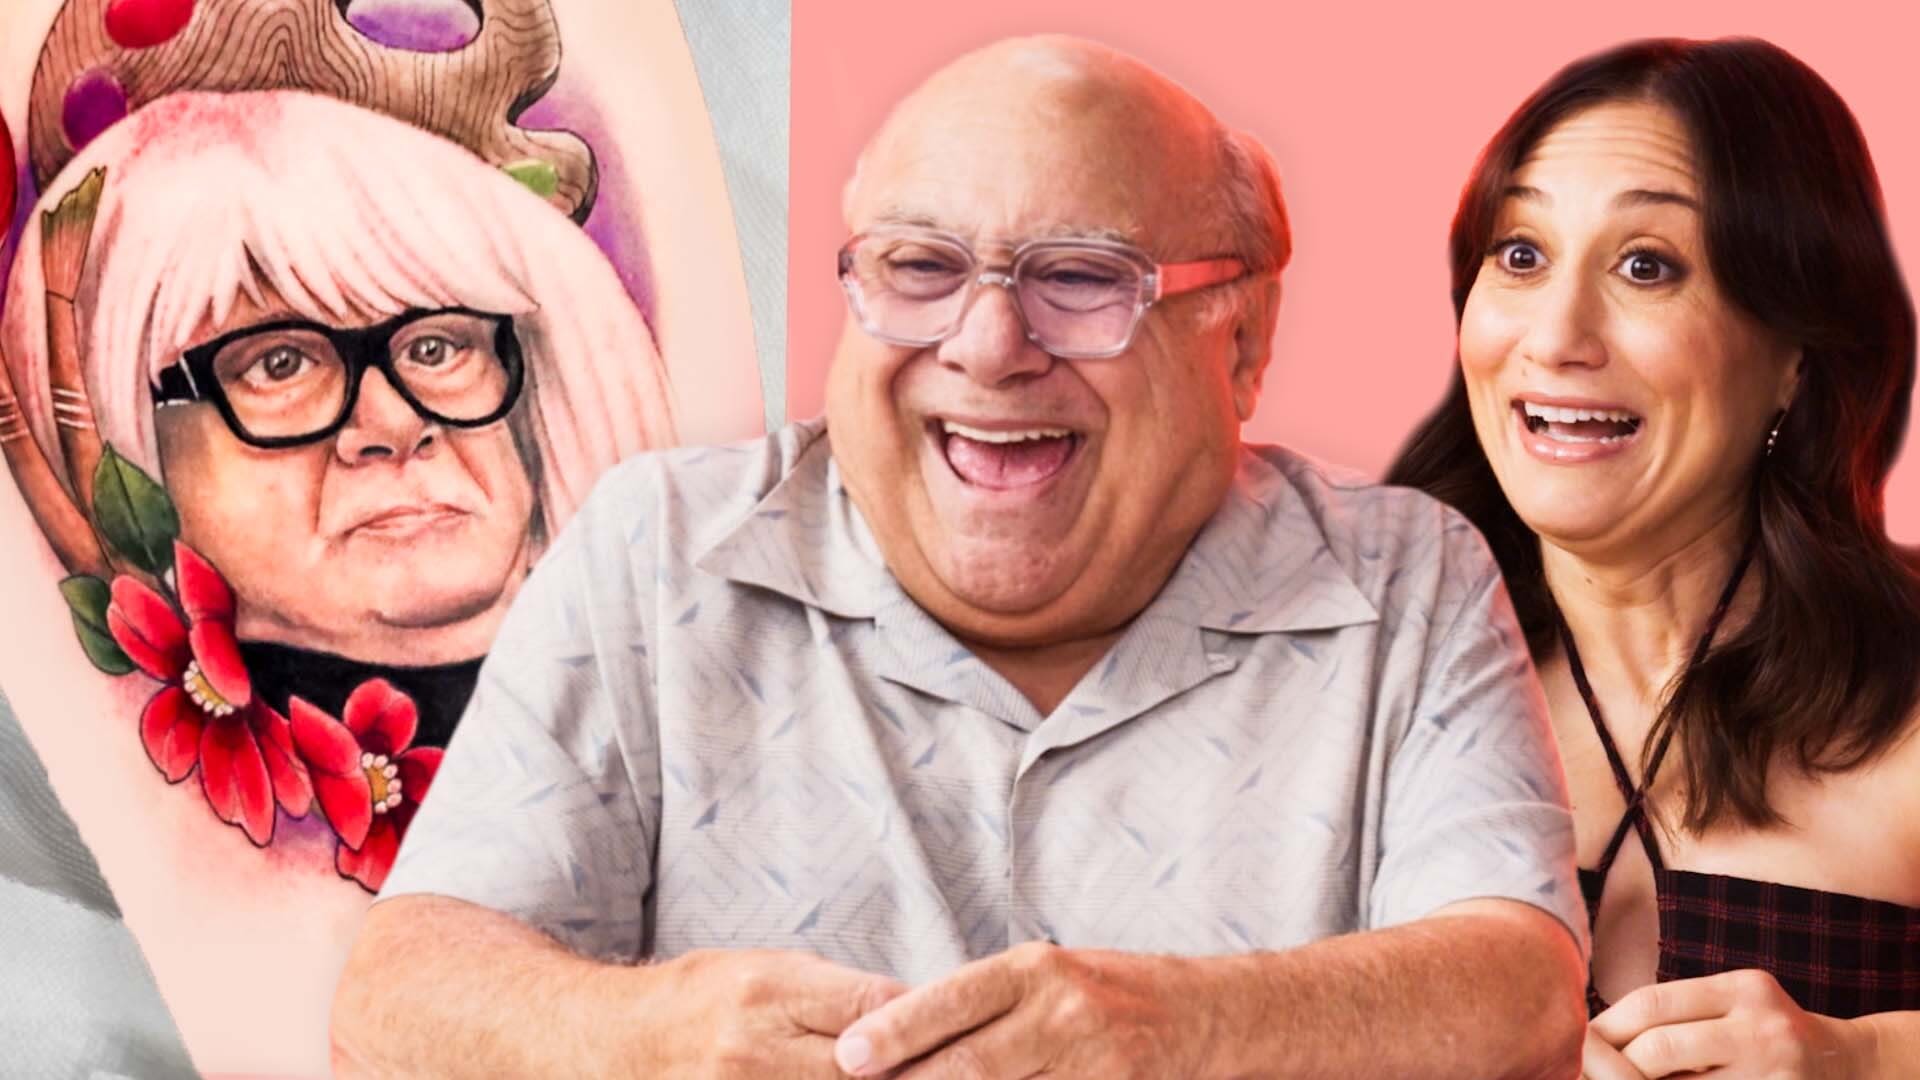 Danny DeVito Addresses Oscars Controversy  Film News  CONVERSATIONS ABOUT  HER